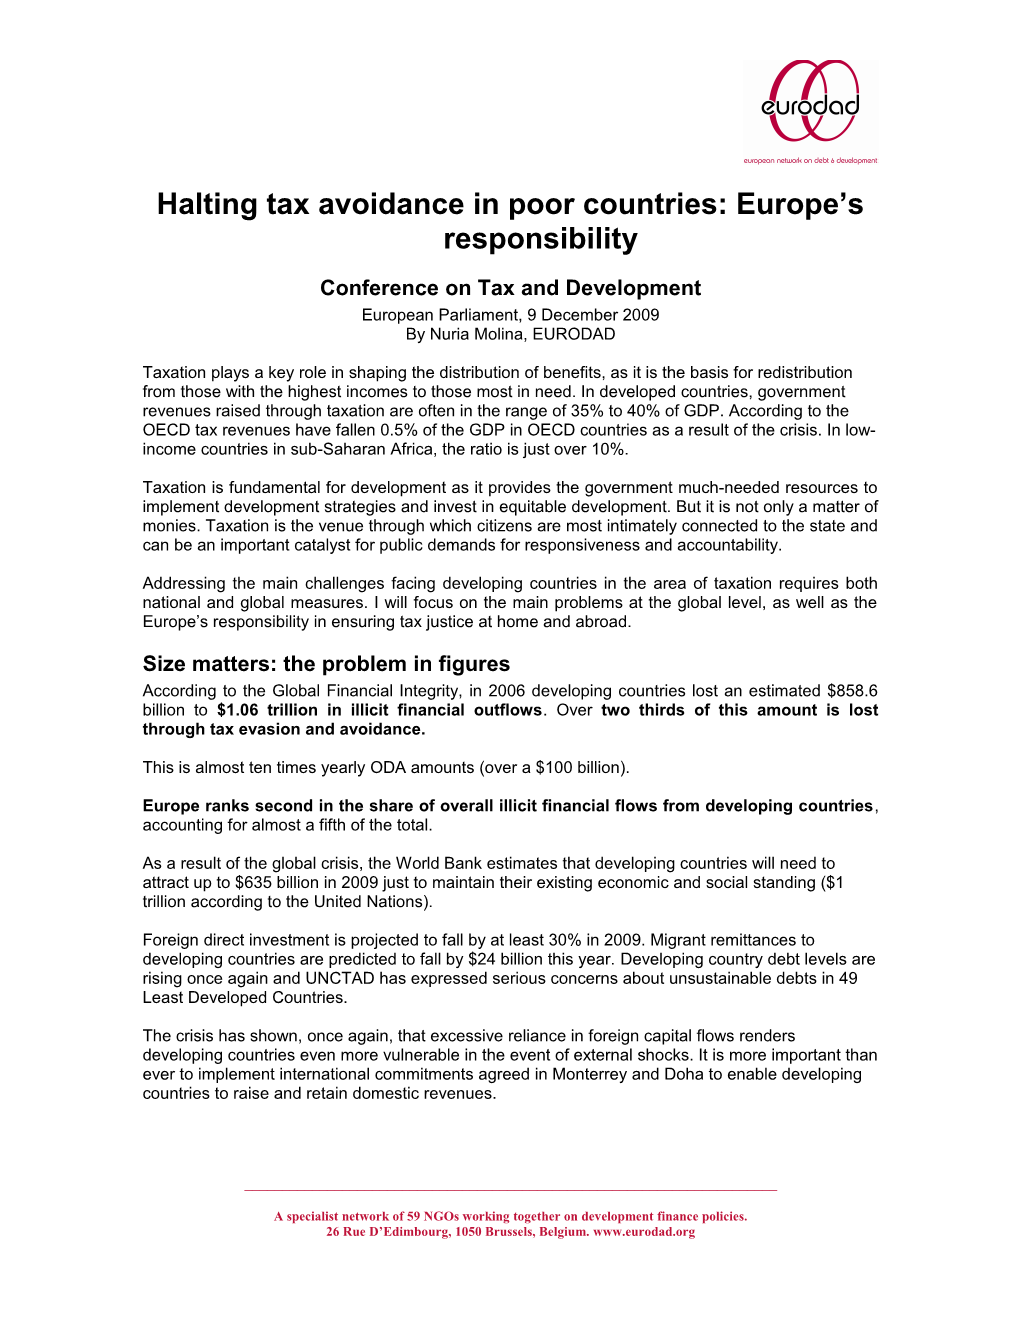 Halting Tax Avoidance in Poor Countries: Europe S Responsibility